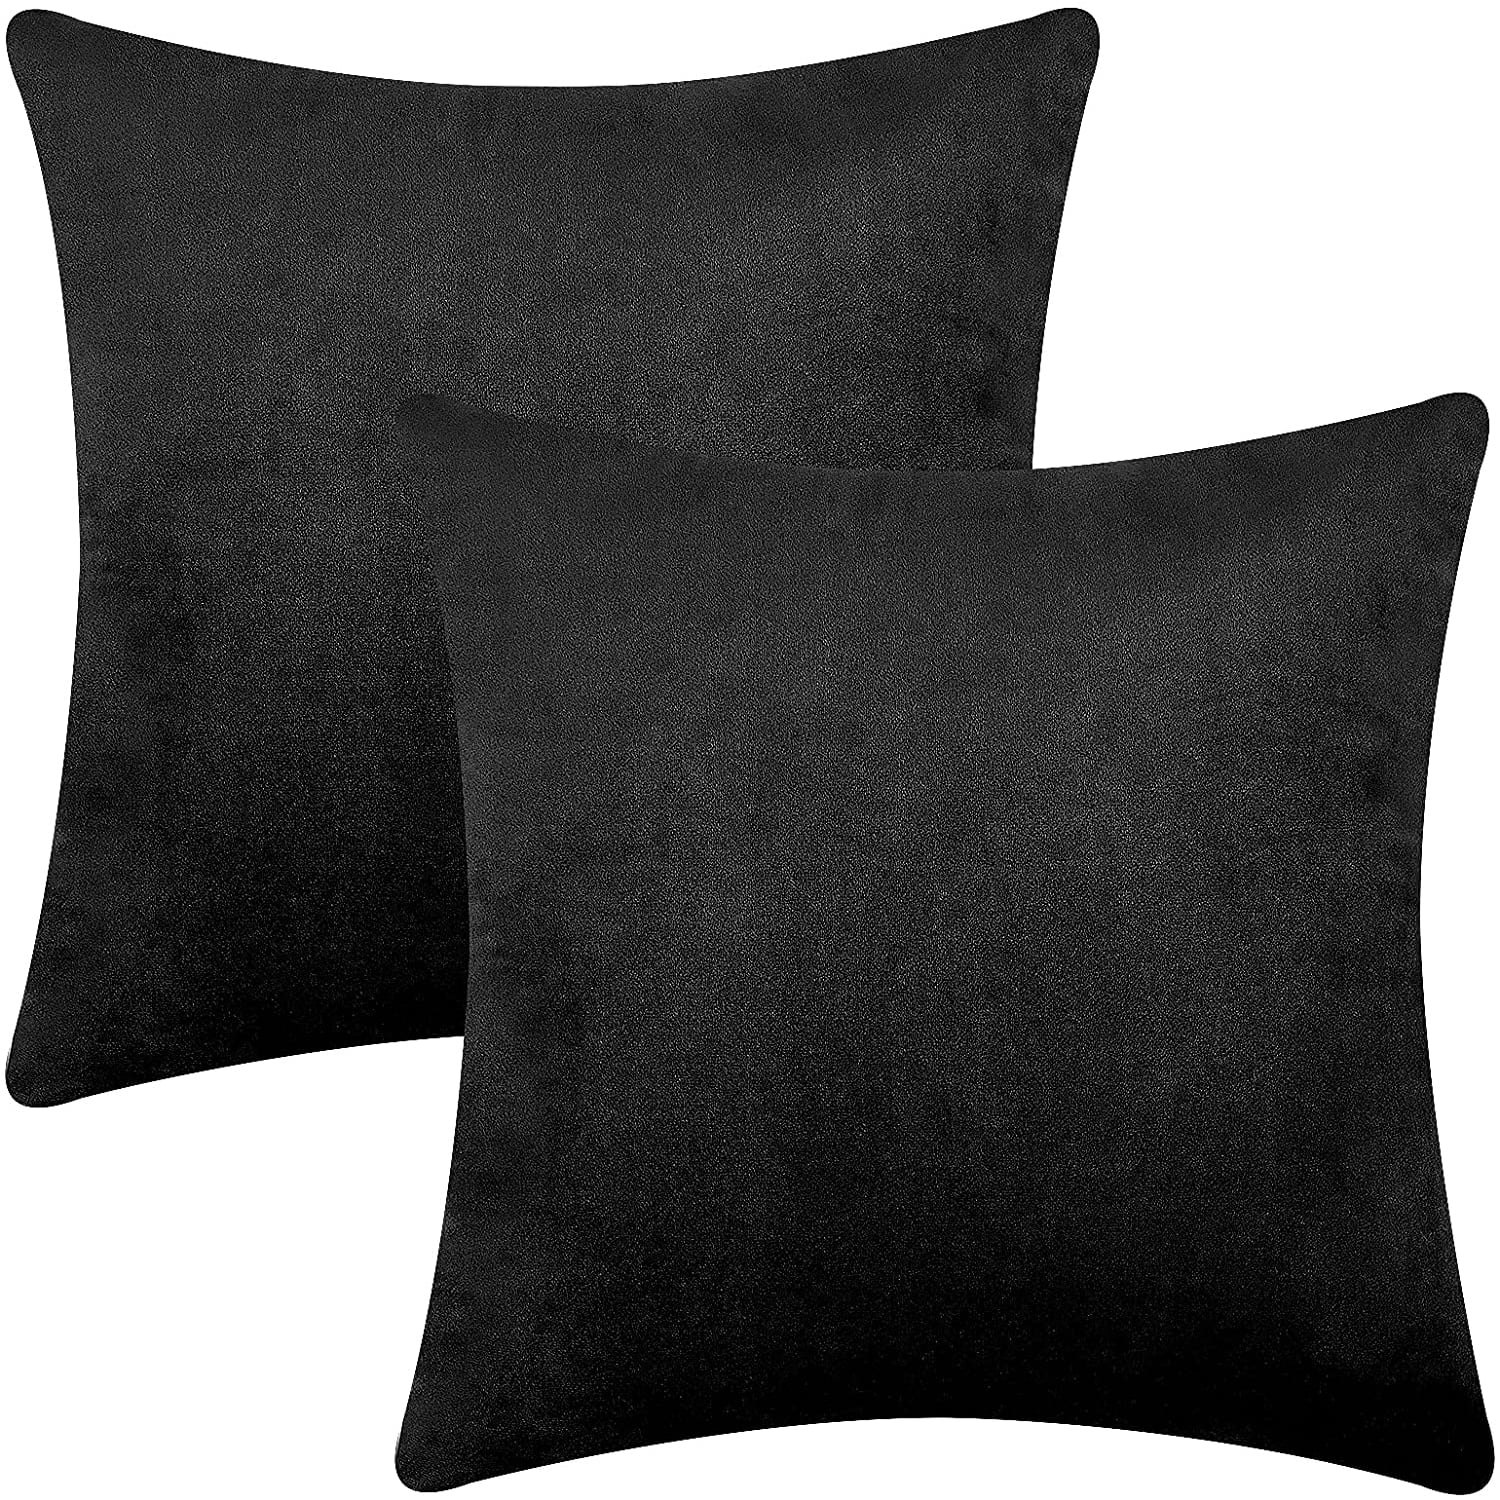 Covers Black & Grey Two Horse Quality Tapestry Fabric Filled Cushion 18x18" 